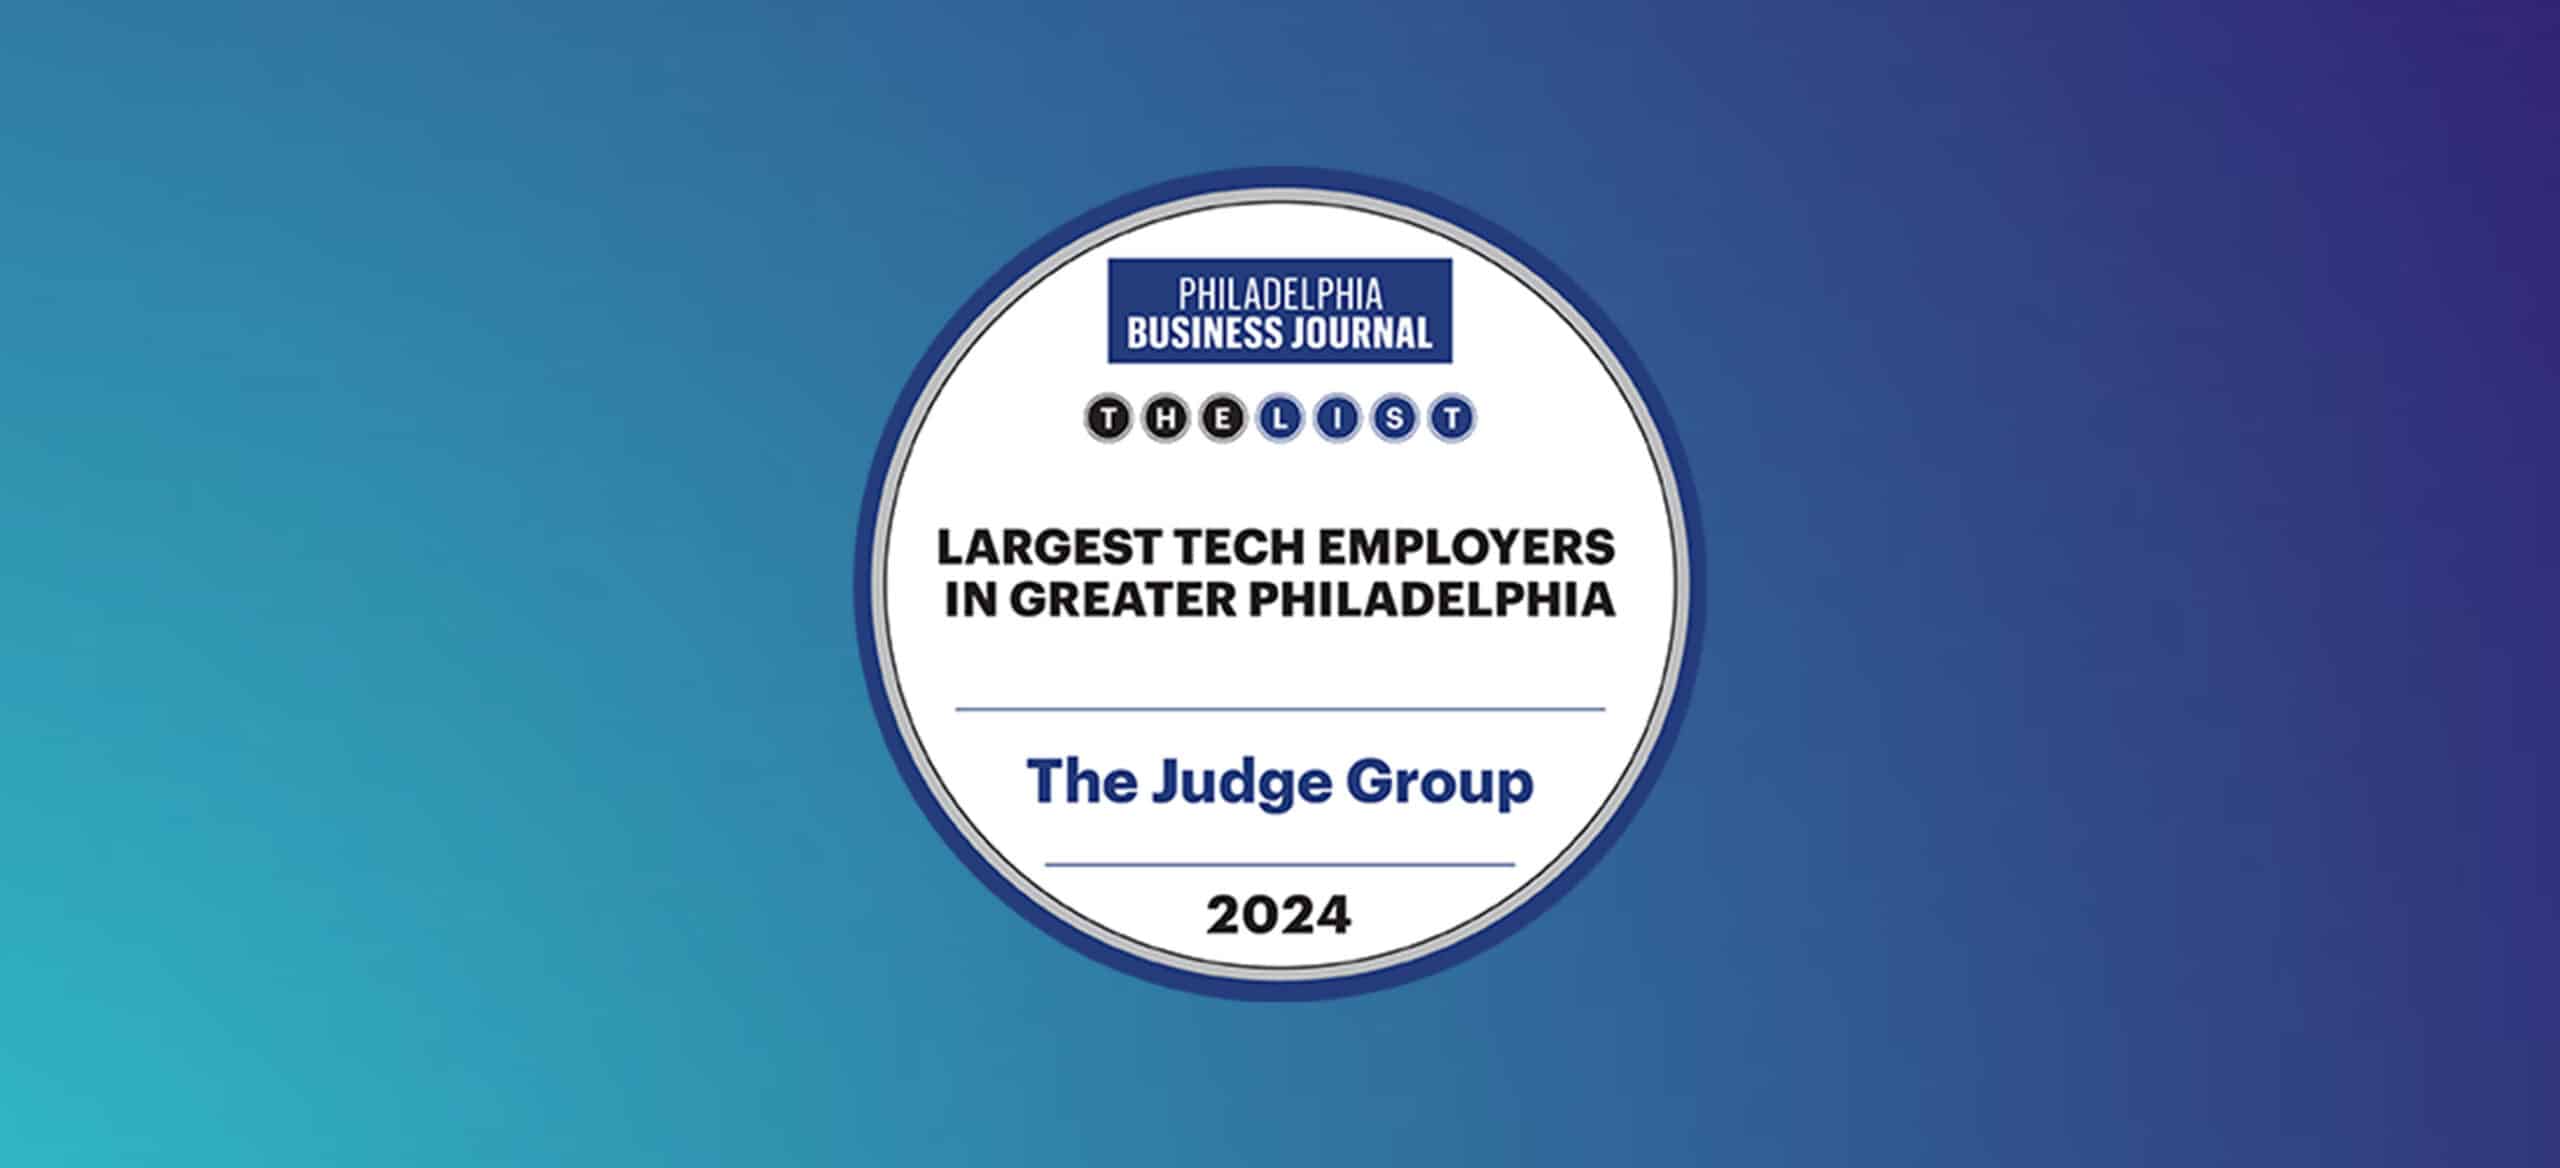 Philadelphia Business Journal - Largest Tech Employers in Greater Philly Award